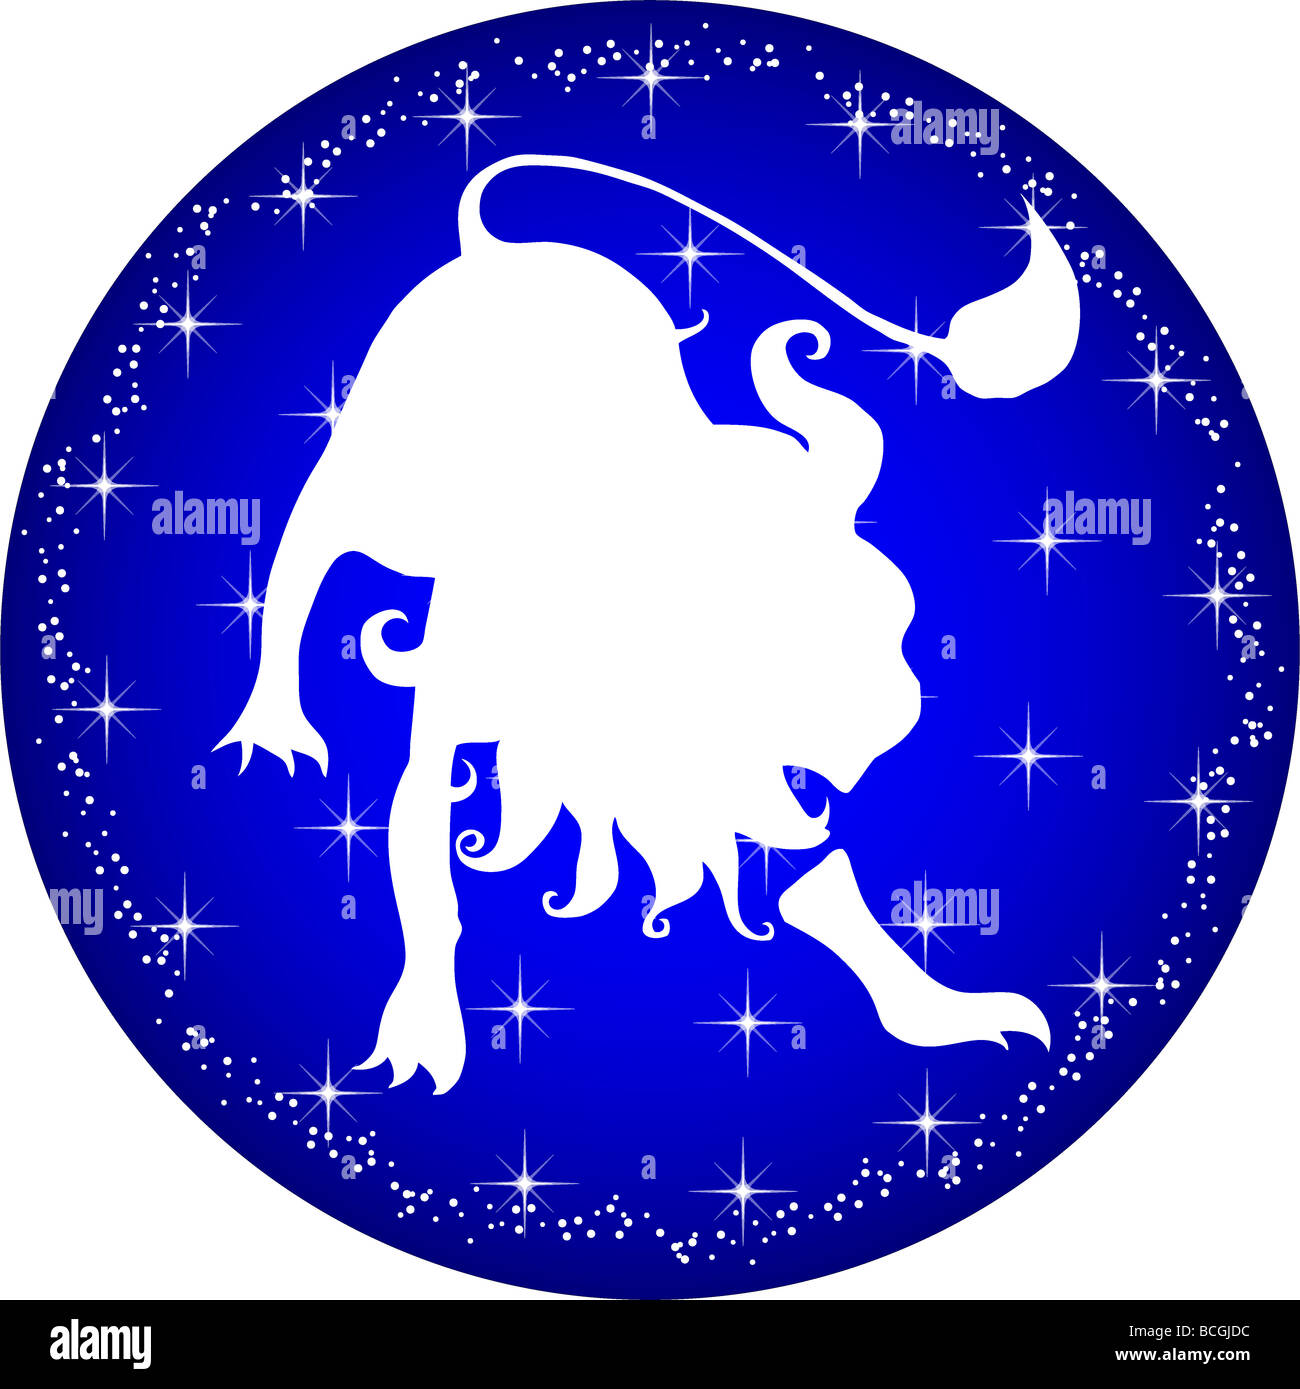 Cancer Constellation Stock Photos  Cancer Constellation Stock Images  Alamy